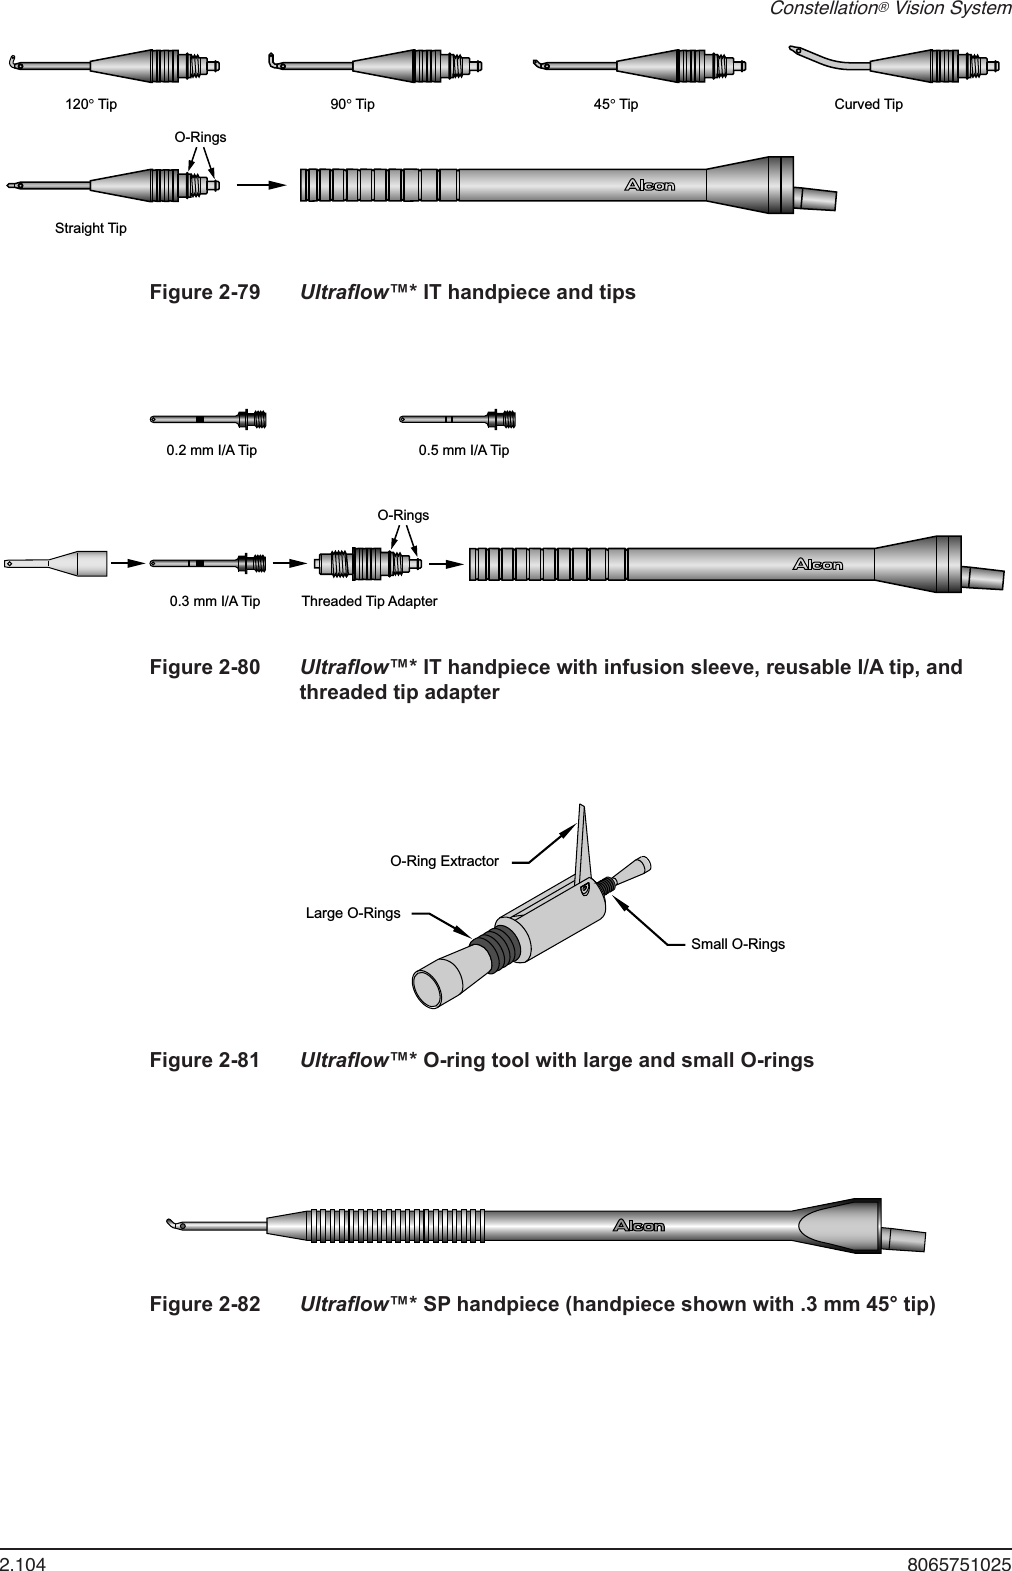 2.104  8065751025Constellation® Vision SystemFigure 2-79  Ultraﬂow™* IT handpiece and tipsFigure 2-80  Ultraﬂow™* IT handpiece with infusion sleeve, reusable I/A tip, and threaded tip adapterFigure 2-81  Ultraﬂow™* O-ring tool with large and small O-ringsFigure 2-82  Ultraﬂow™* SP handpiece (handpiece shown with .3 mm 45° tip)O-RingsStraight Tip120°Tip 90°Tip 45°Tip Curved TipO-Rings0.5 mm I/A TipThreaded Tip Adapter0.2 mm I/A Tip0.3 mm I/A TipO-Ring ExtractorSmall O-RingsLarge O-Rings